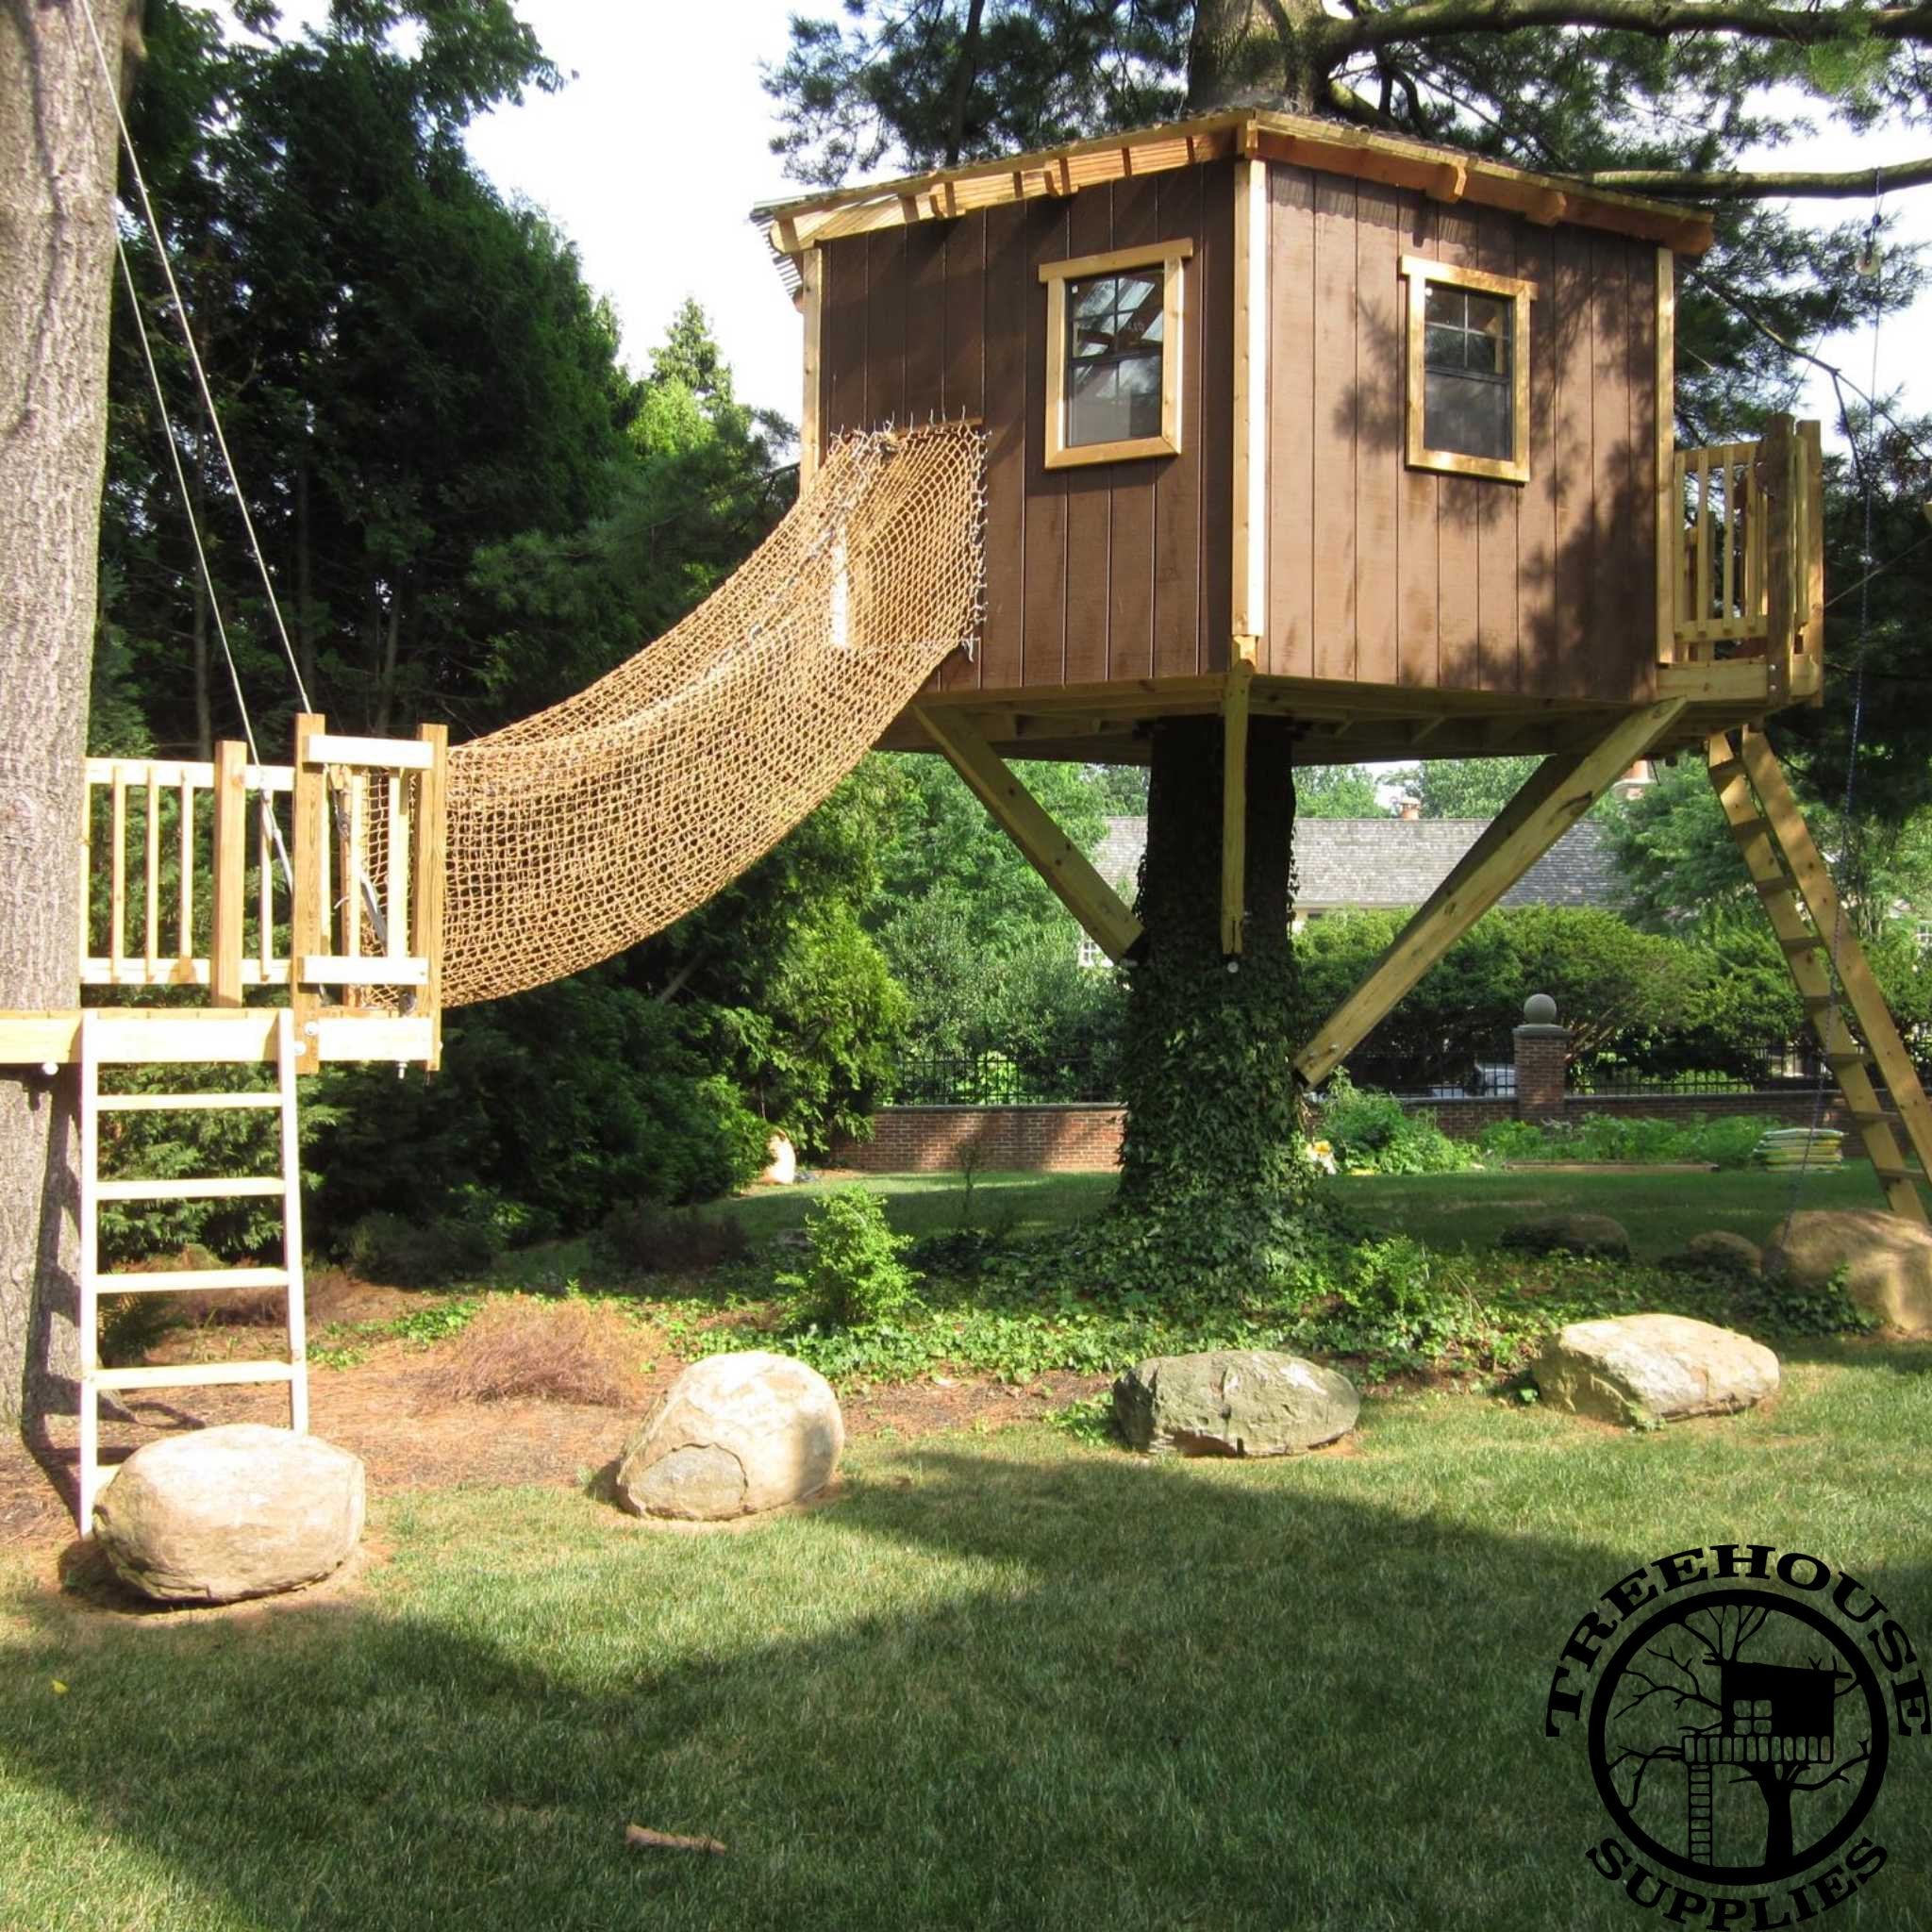 12' DIAMETER HEXAGON TREEHOUSE PLAN - NOW INCLUDES STEP-BY-STEP 3D MODELING!! - Treehouse Supplies